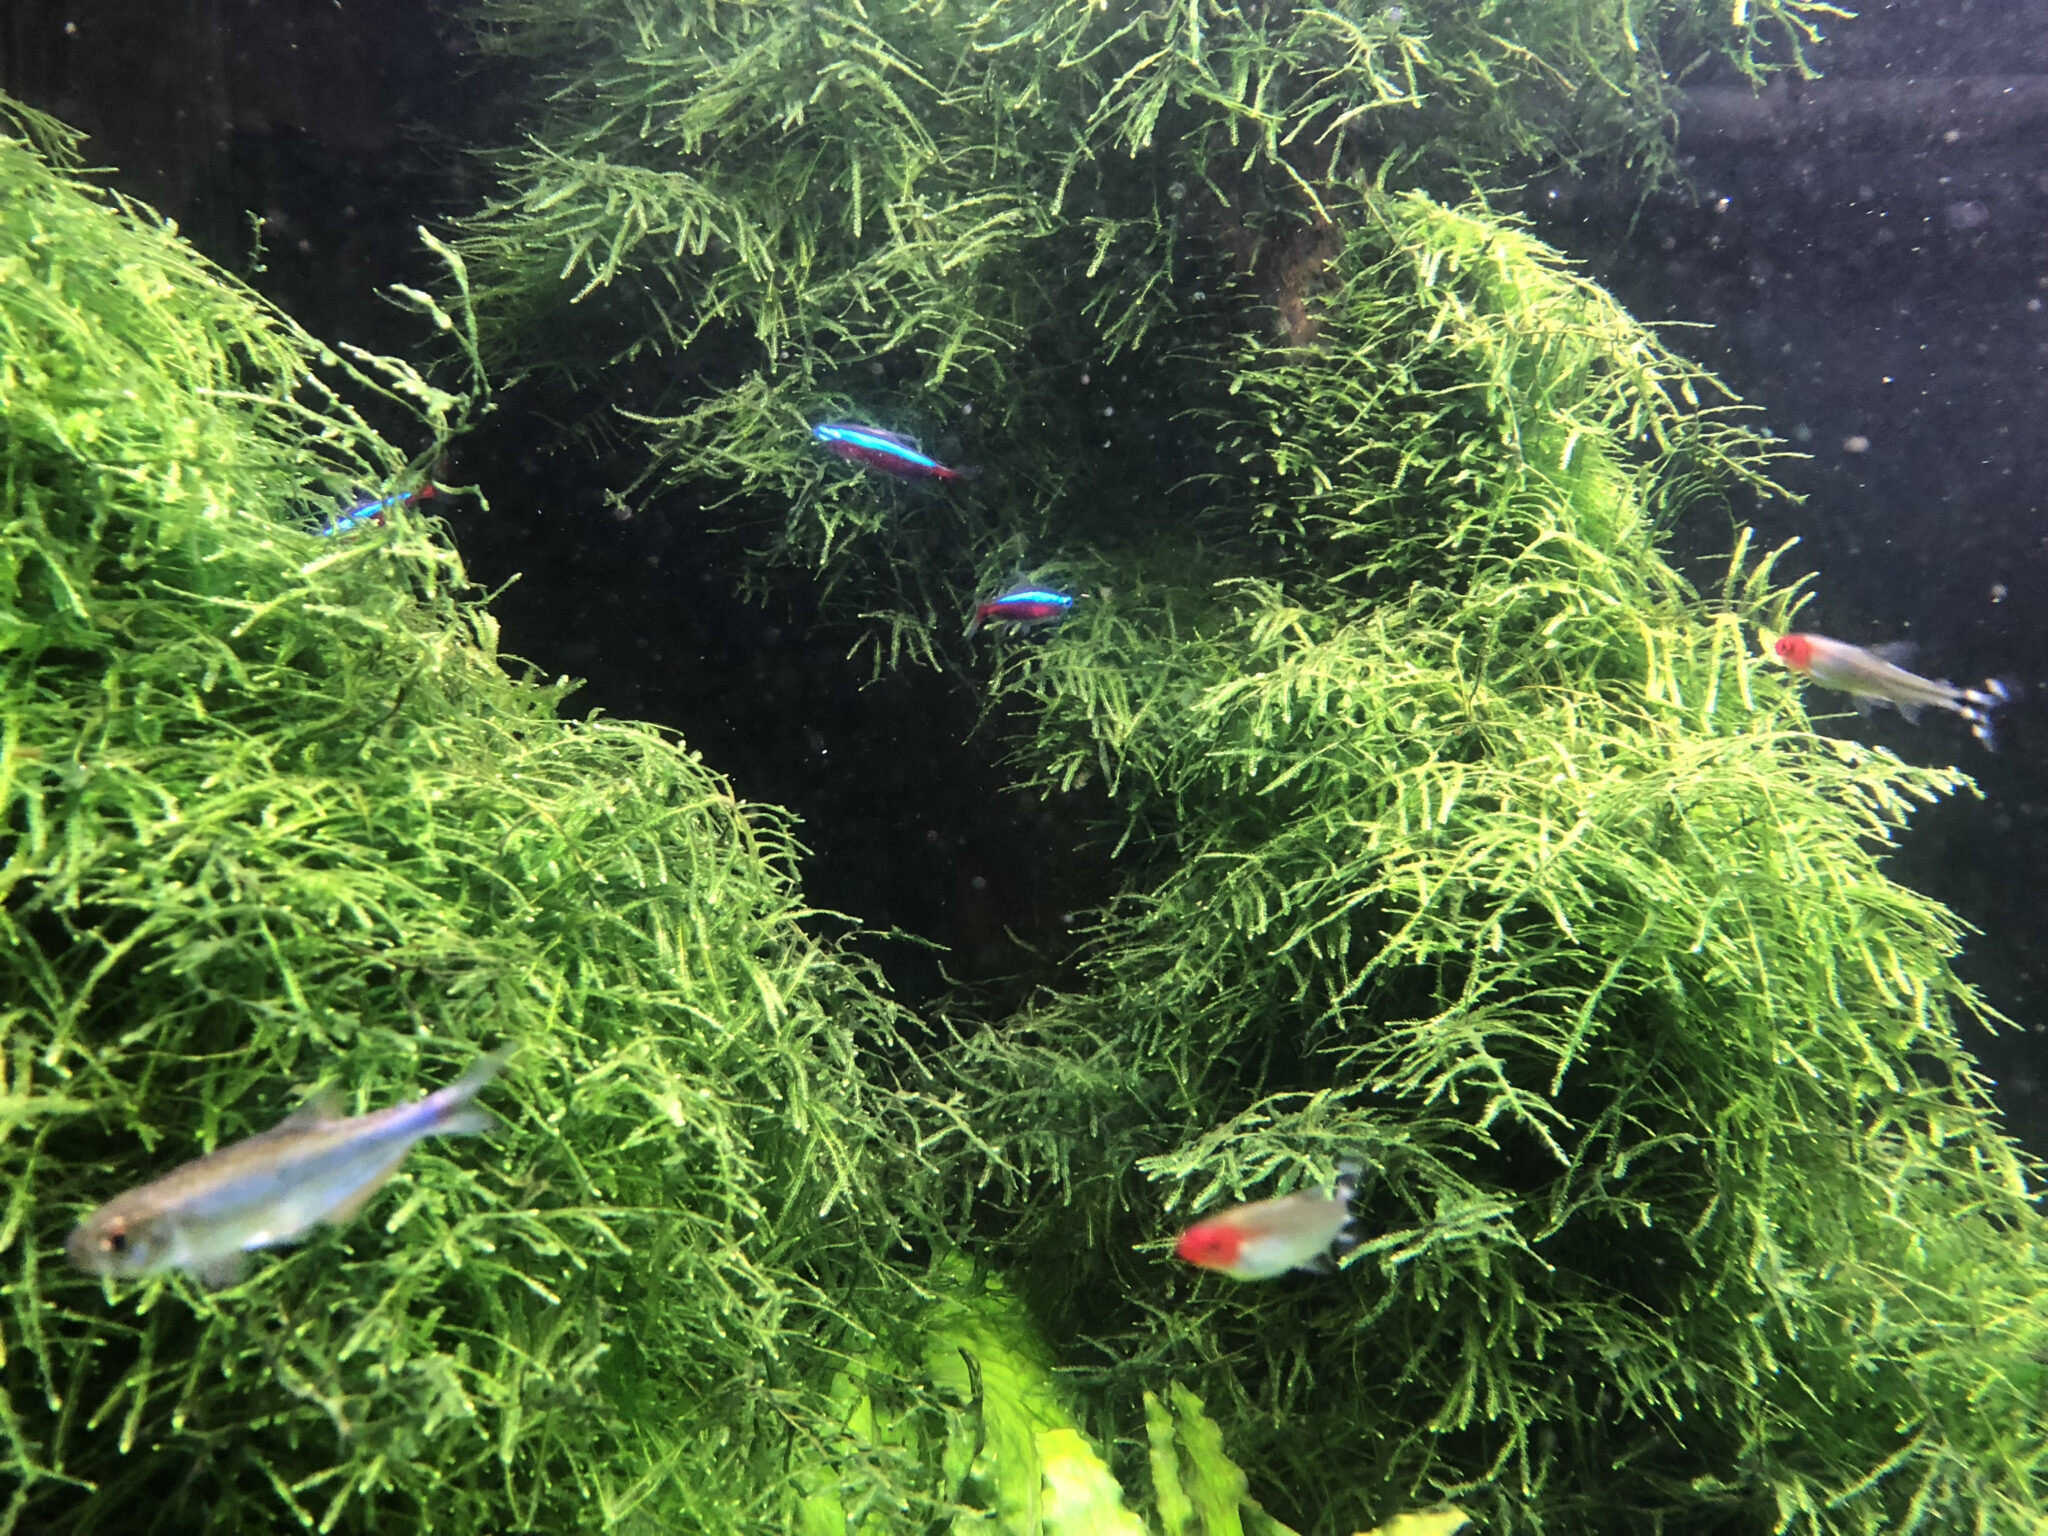 Tetras are schooling dither fish